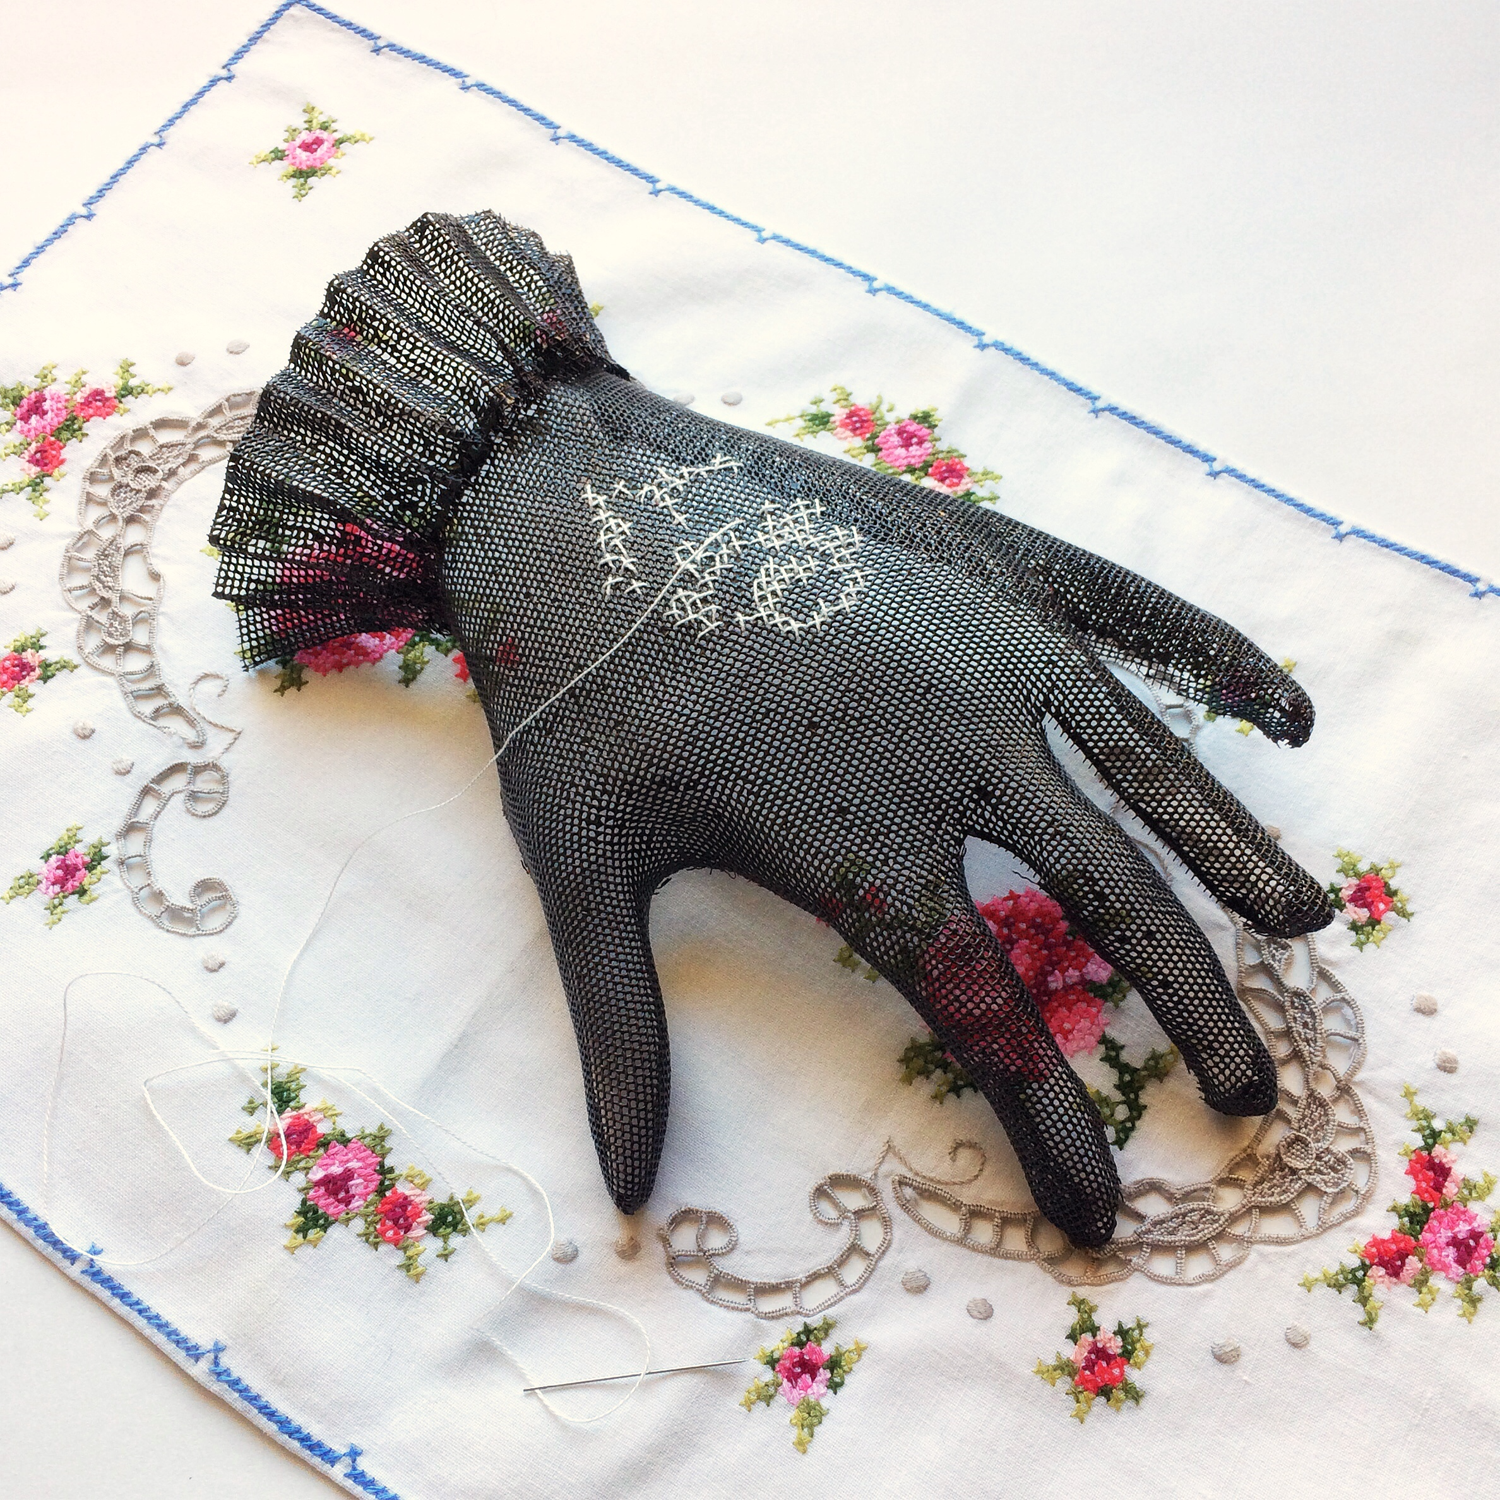 Enamelled copper mesh glove with stitching resting on found embroidered tray cloth